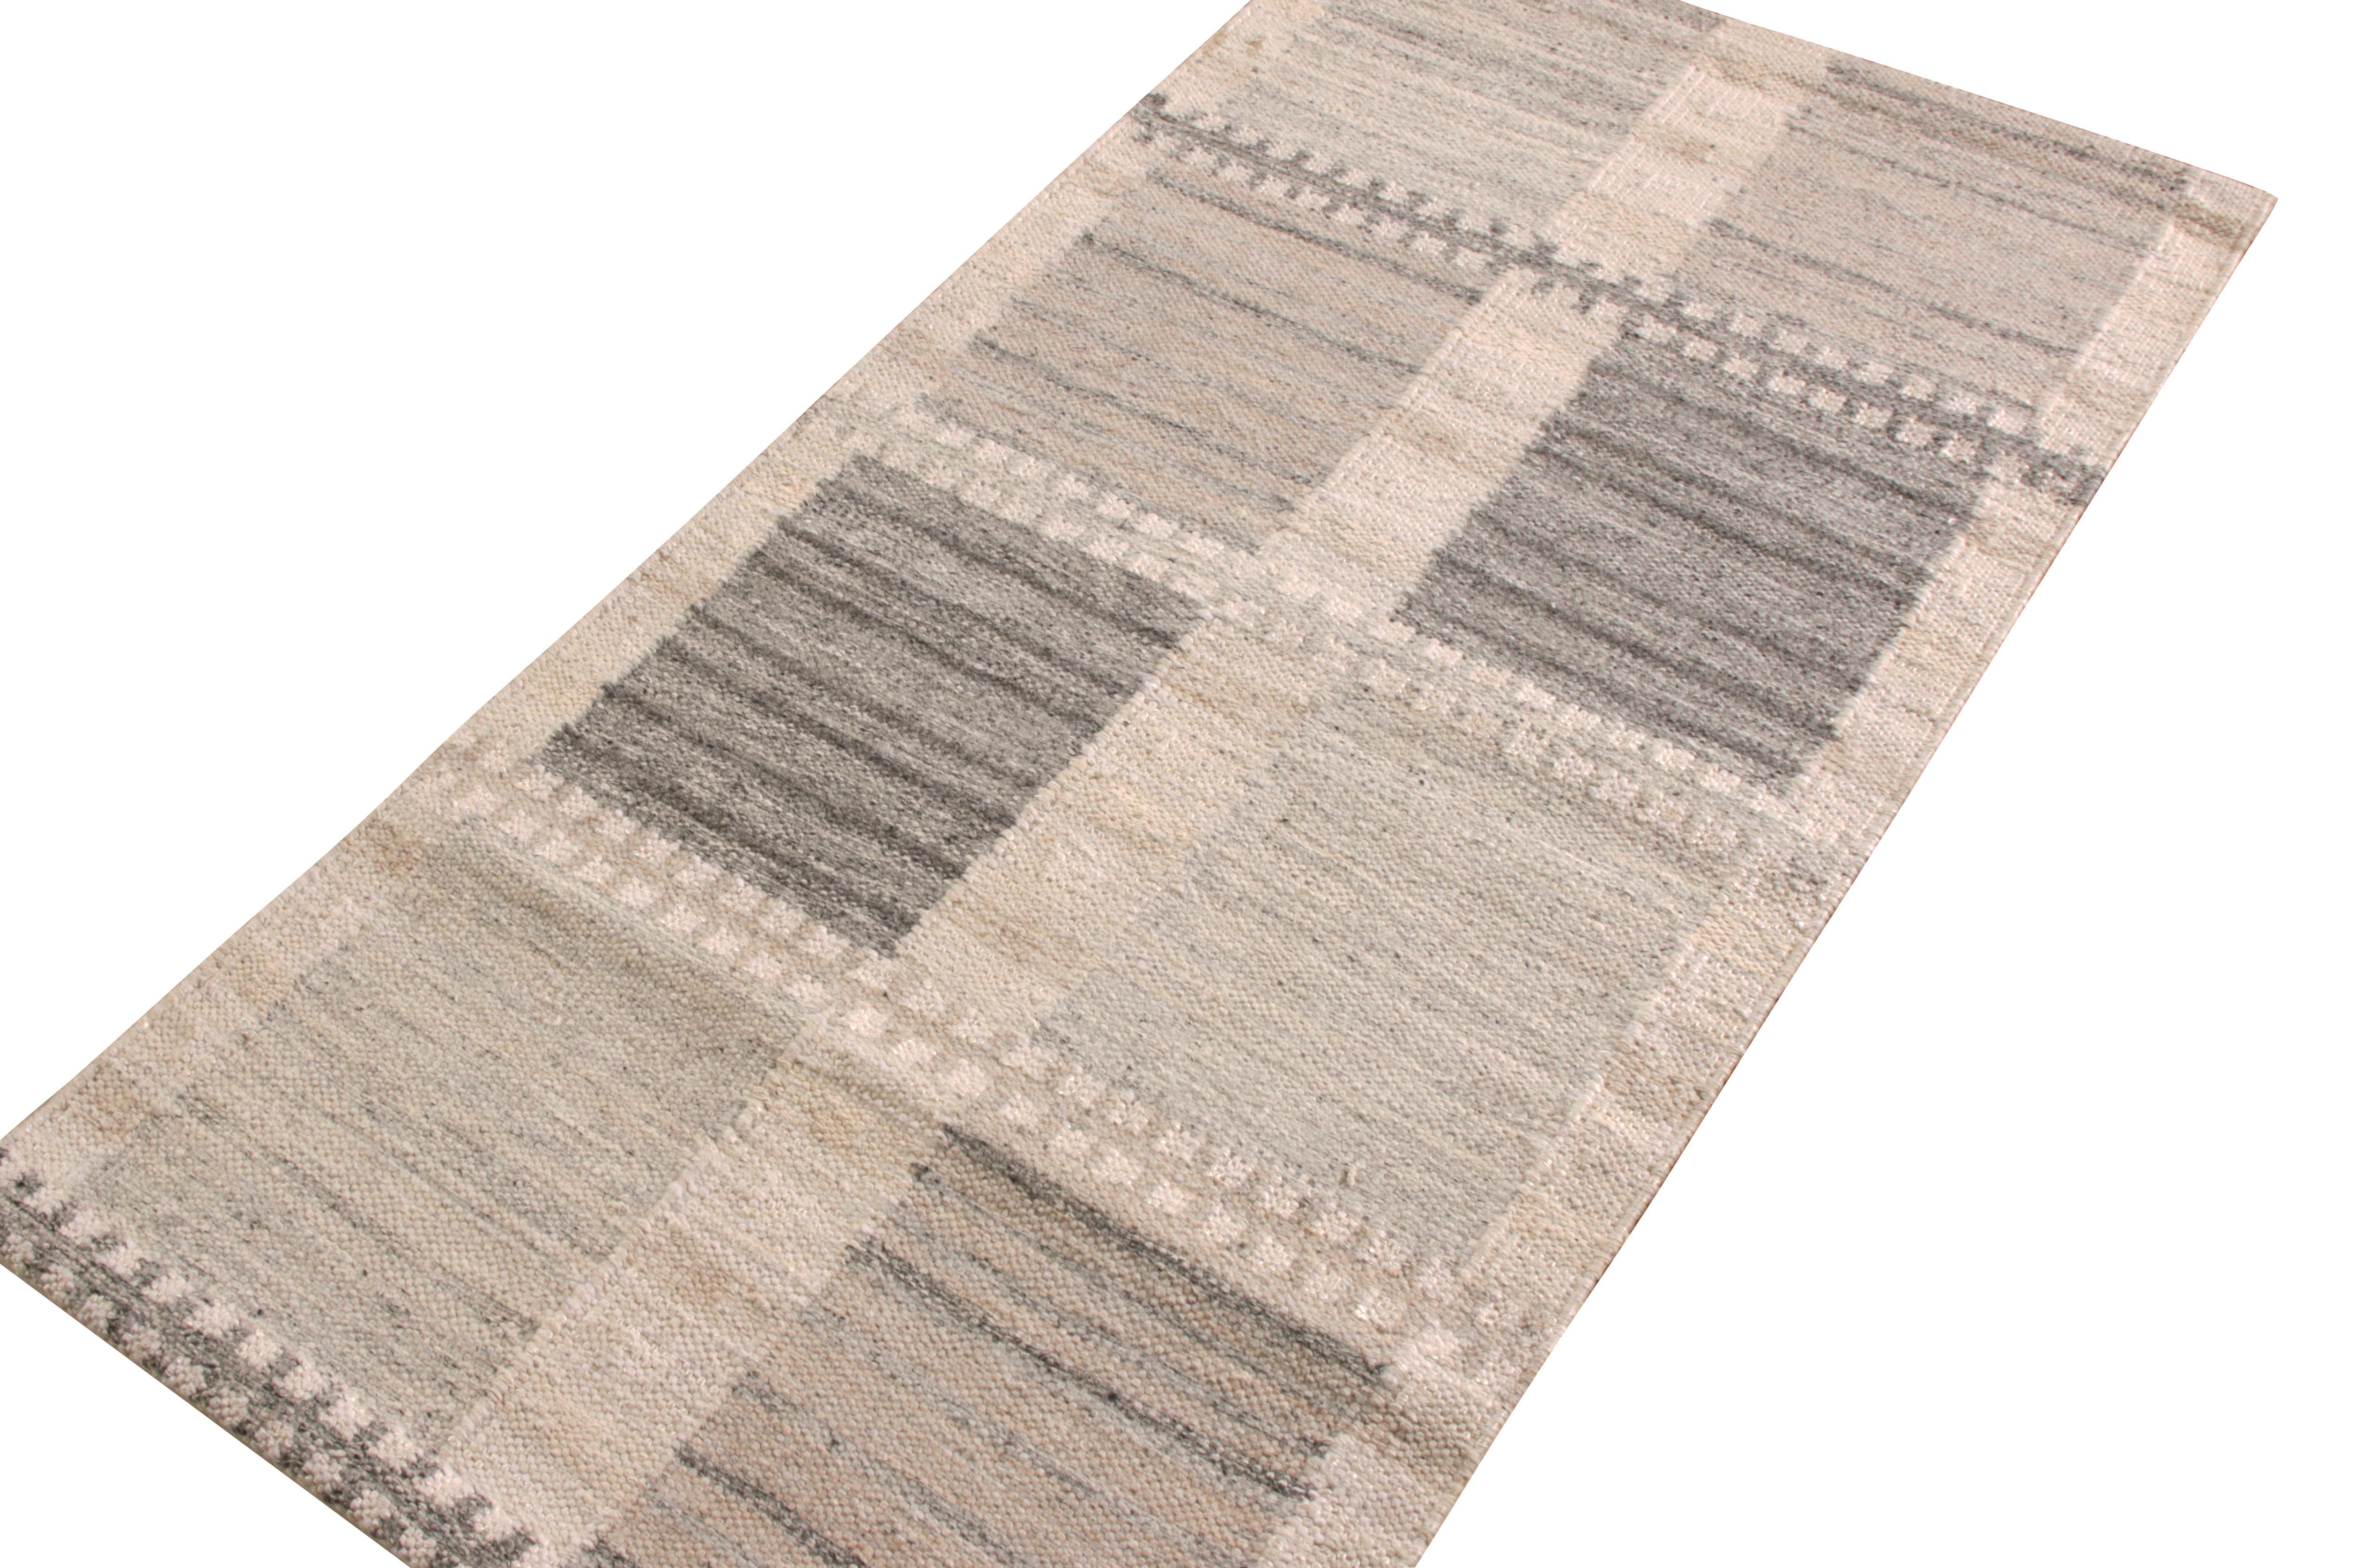 Of nearly a runner size, this classic Scandinavian Kilim is a flattering entry to Rug & Kilim’s acclaimed collection. The rug envisions the bonding of refined symmetry in pattern prospering in earthy hues of beige-brown and gray with crisp blue and